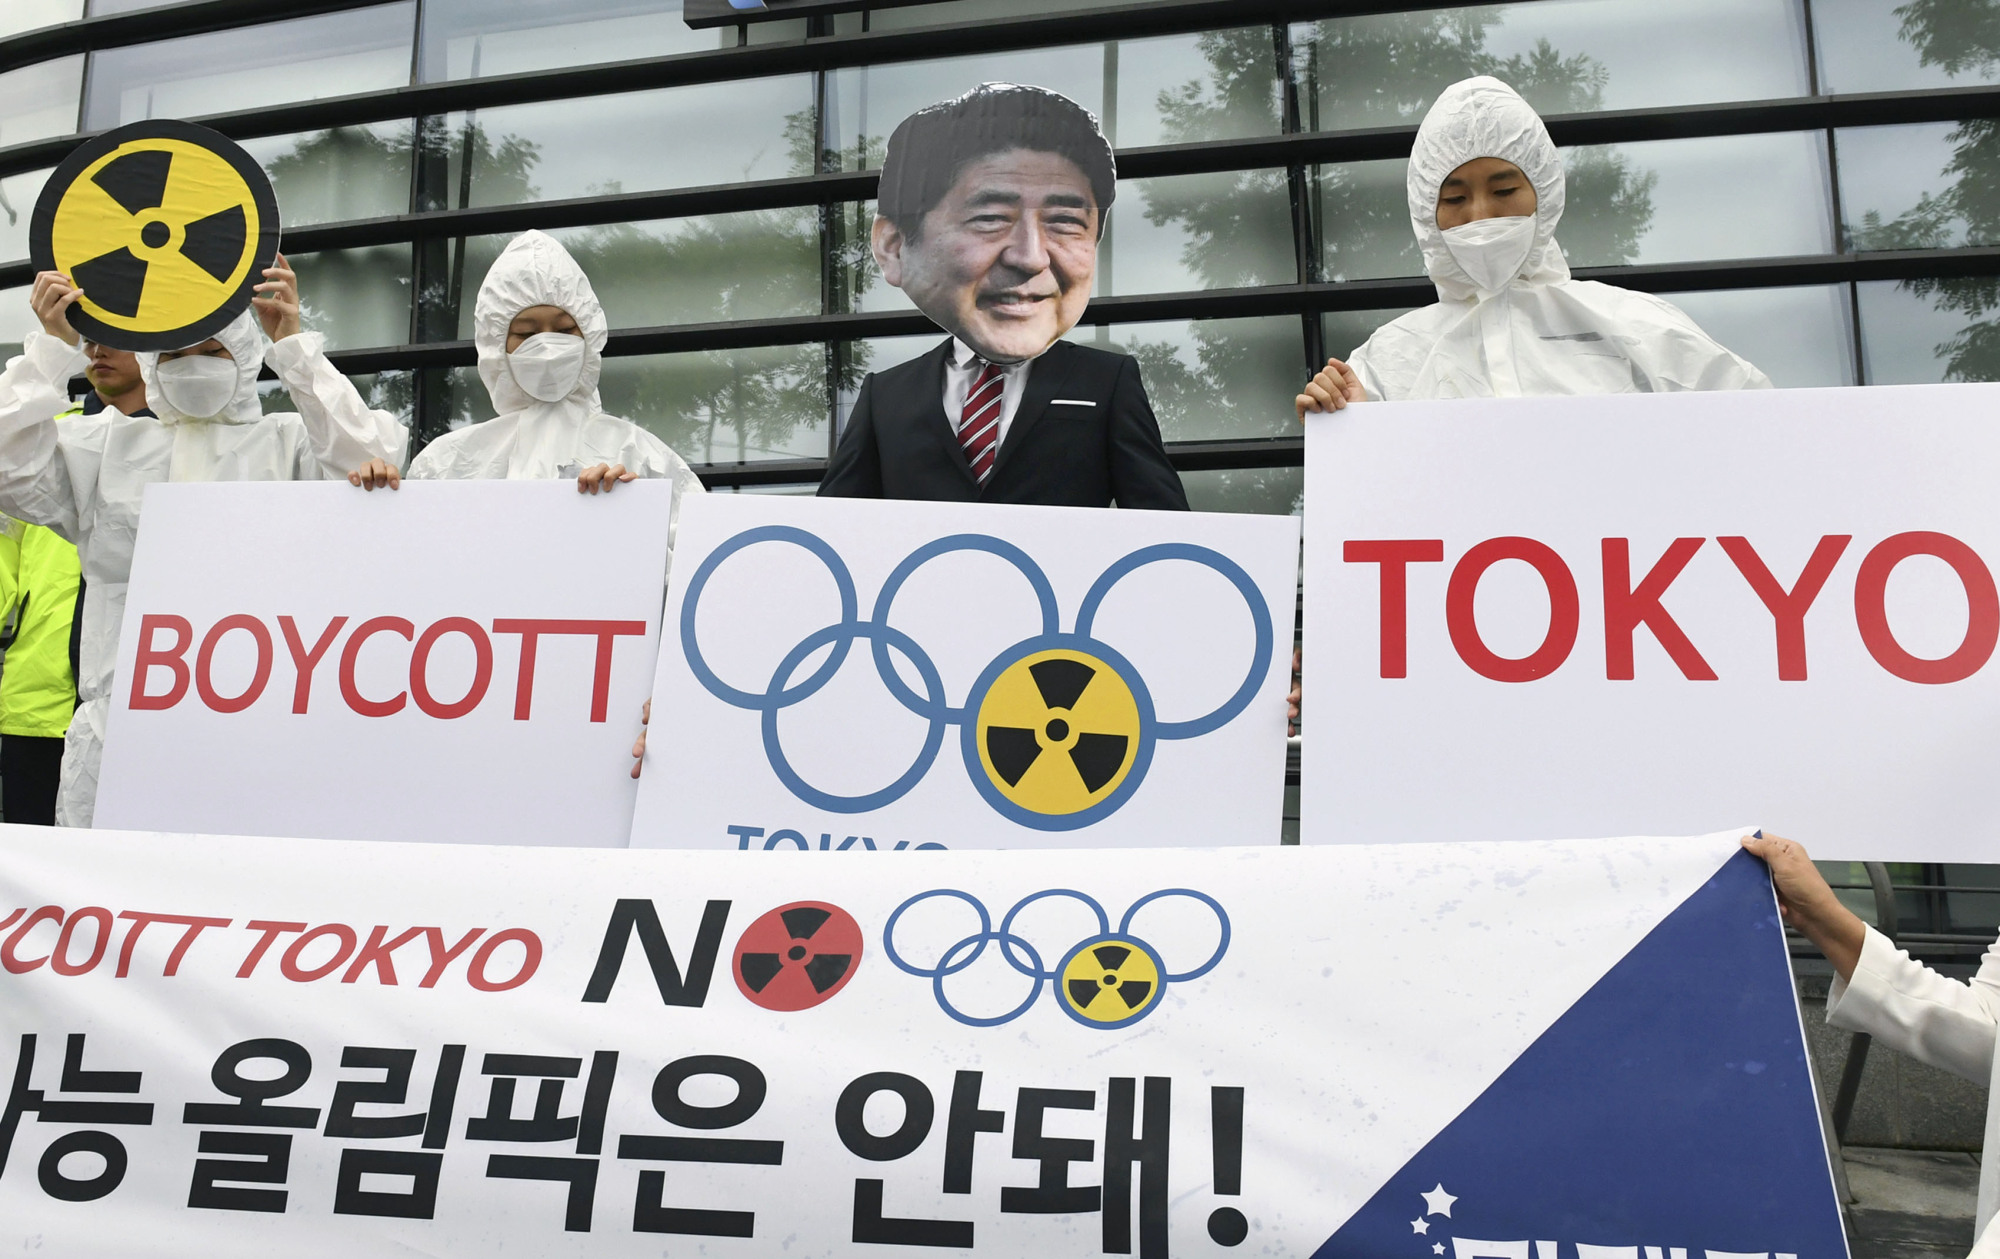 People in protective gear gather in front of the Japanese Embassy in Seoul on Aug. 7, 2019, calling for a boycott of the 2020 Tokyo Olympics, citing the need to protect athletes from exposure to radioactive substances released in the wake of the 2011 Fukushima nuclear crisis. | KYODO